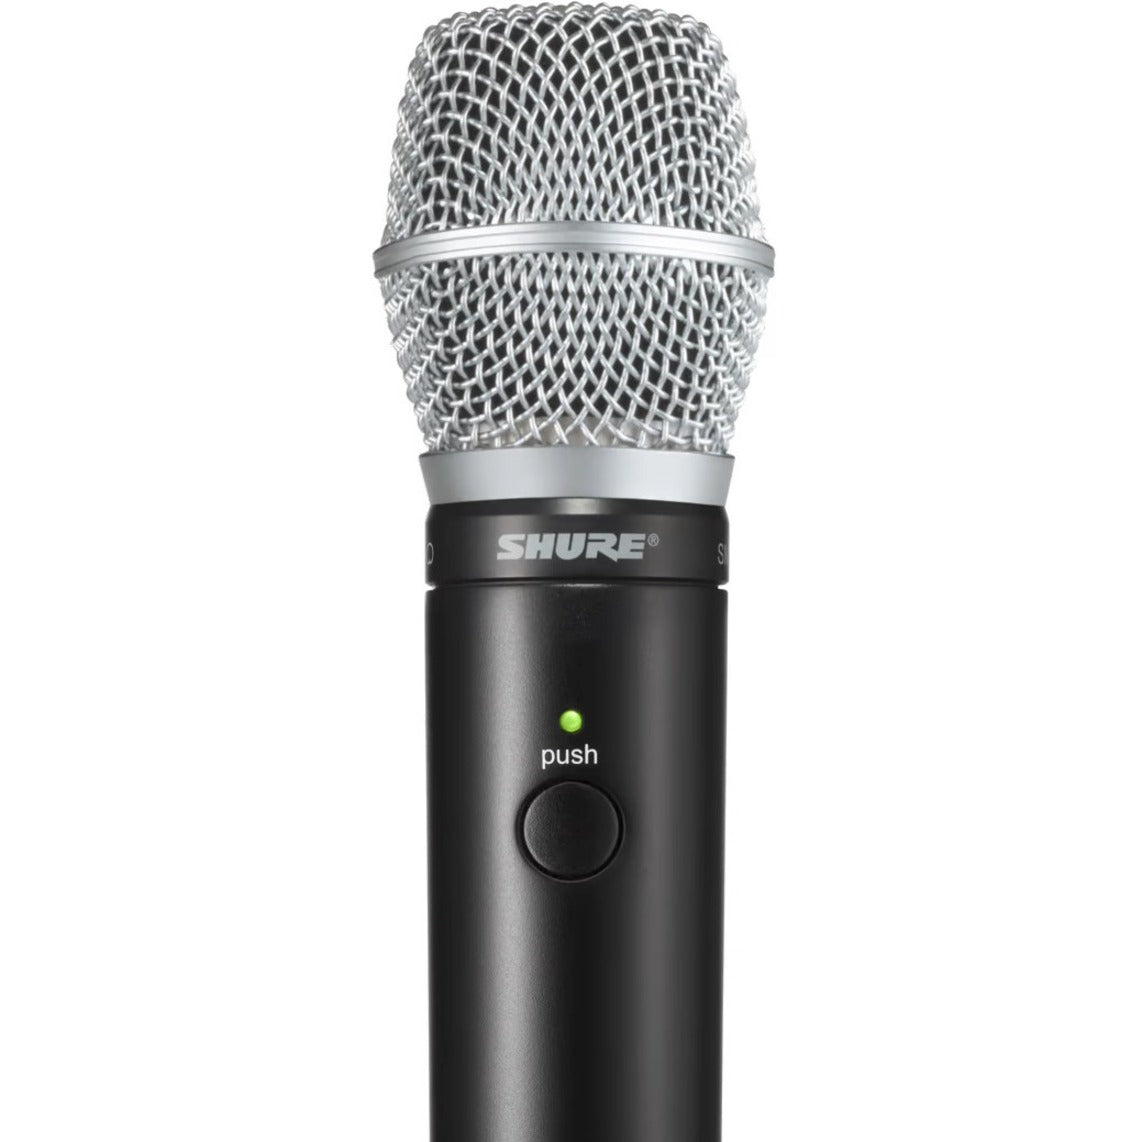 Shure MXW2 Handheld Transmitter with SM86 Microphone